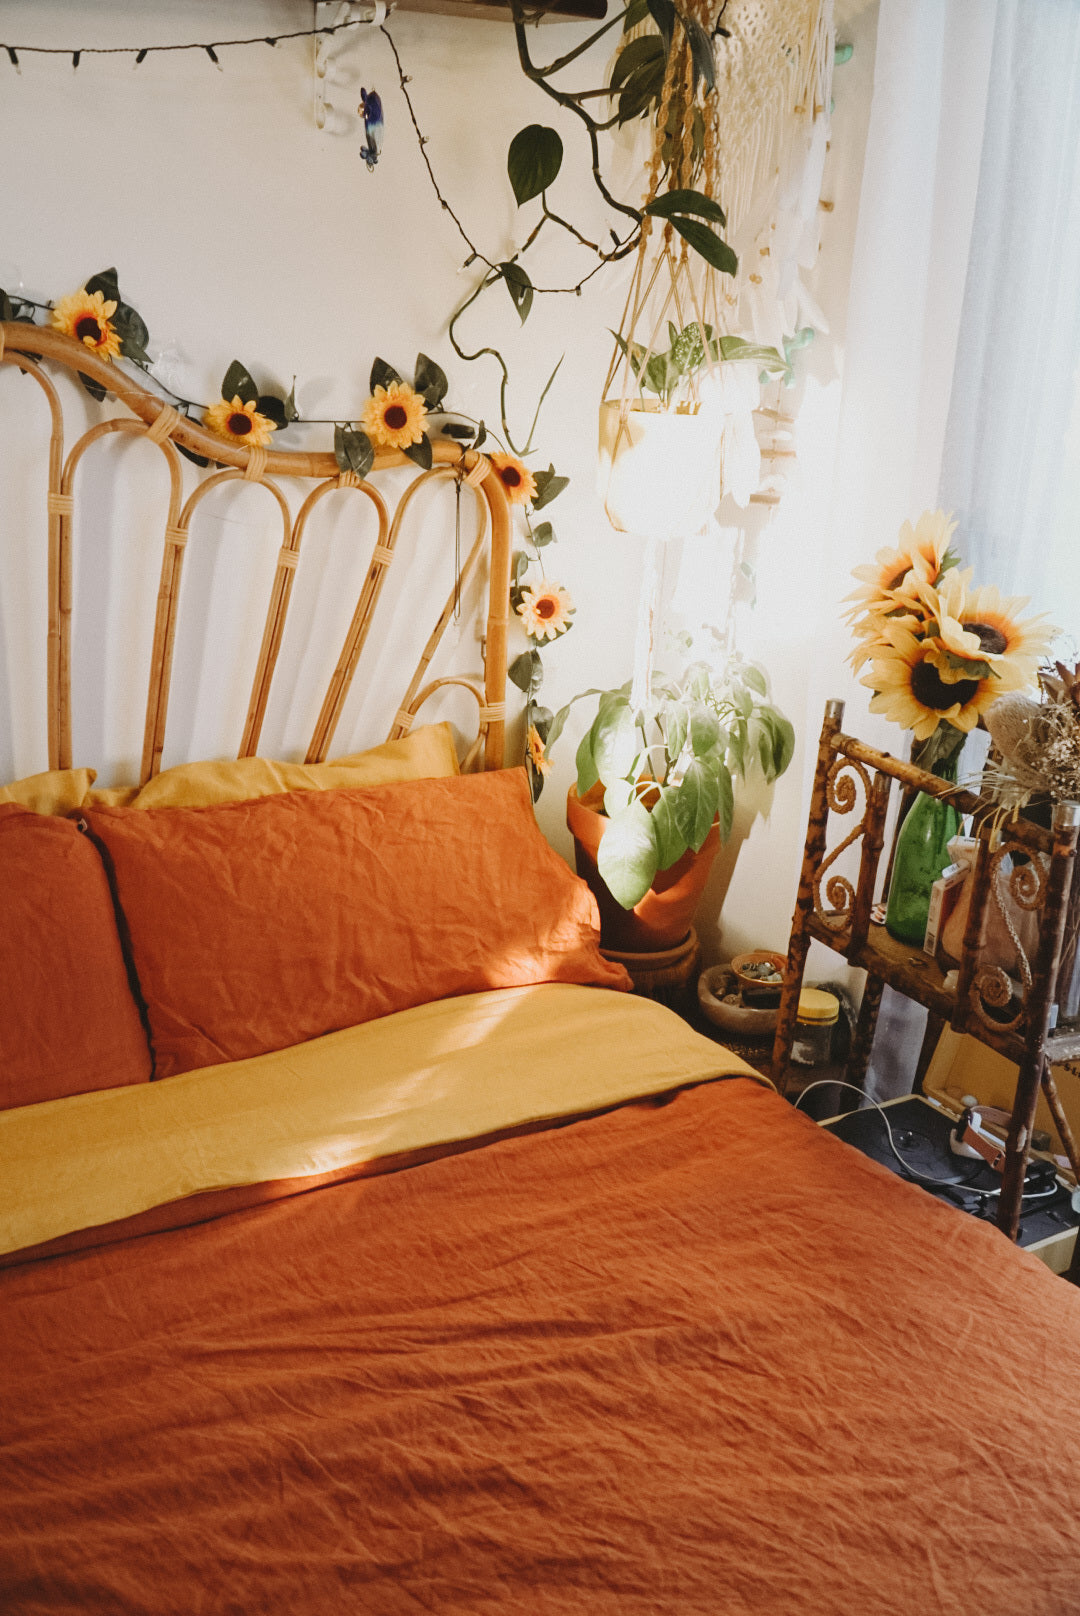 Eva's terracotta hemp linen sheets on a bed surrounded by thrifted items and sunflowers